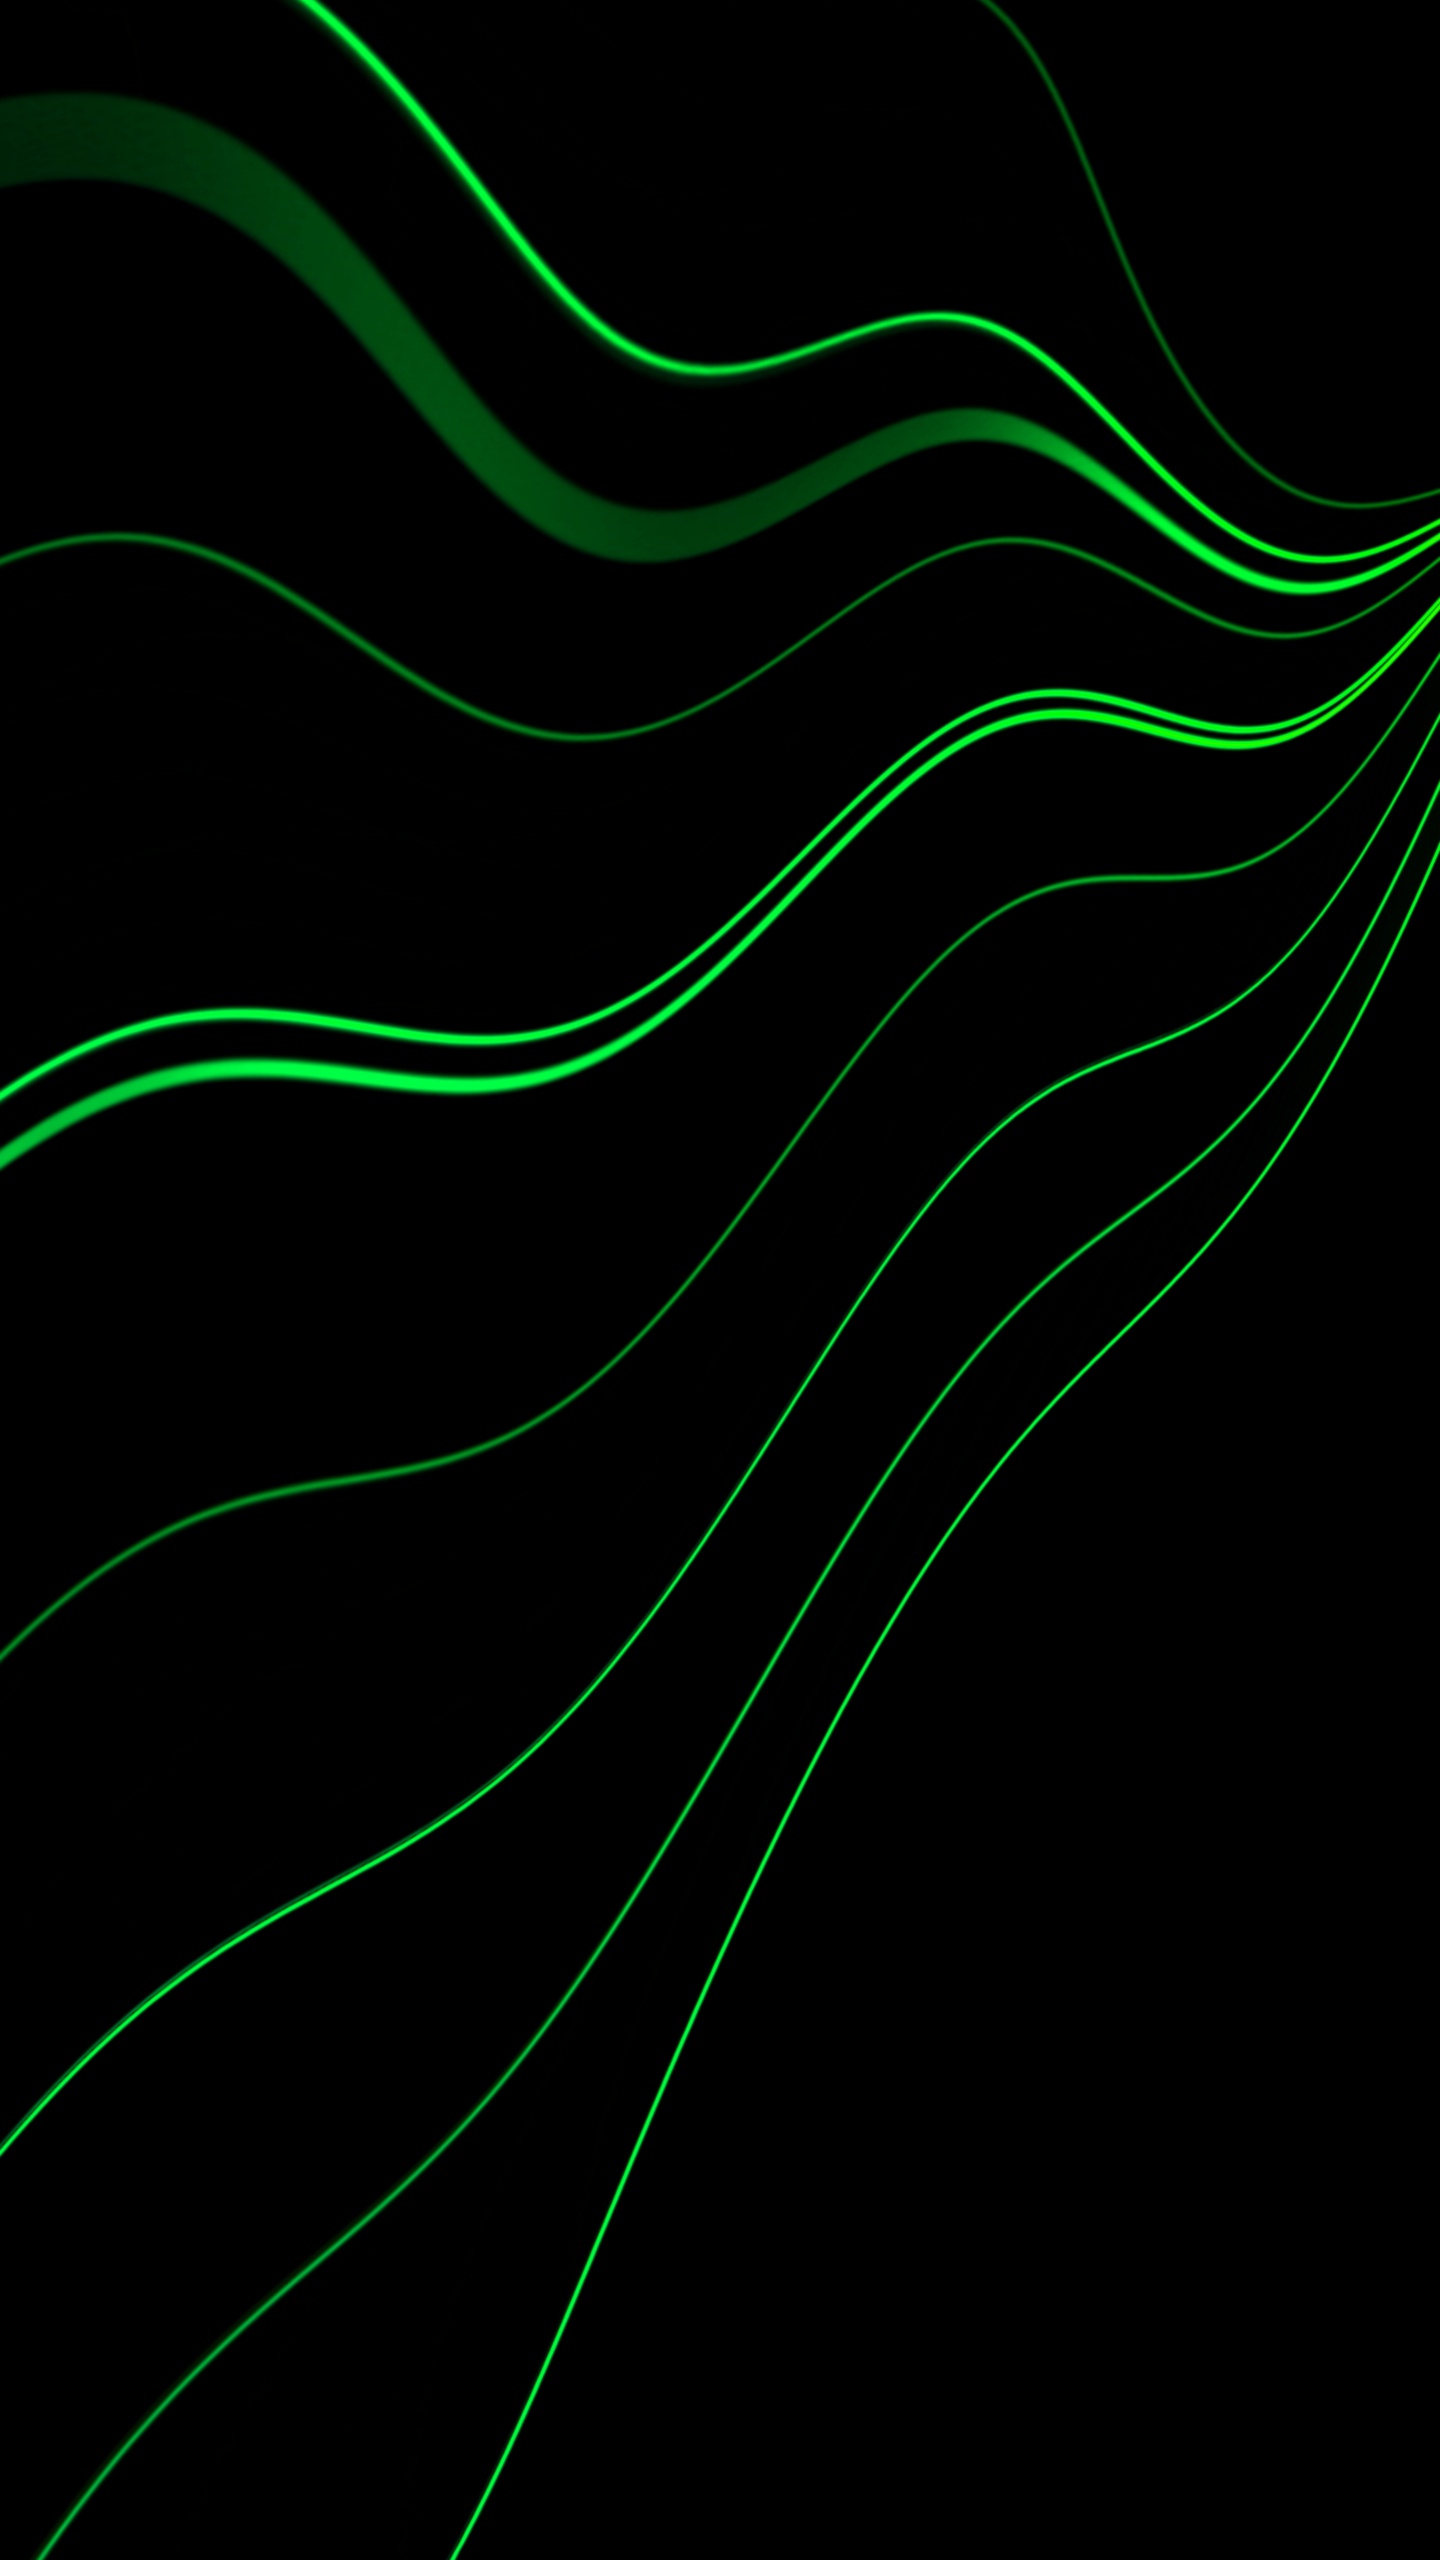 Green and White Line Illustration. Wallpaper in 1440x2560 Resolution